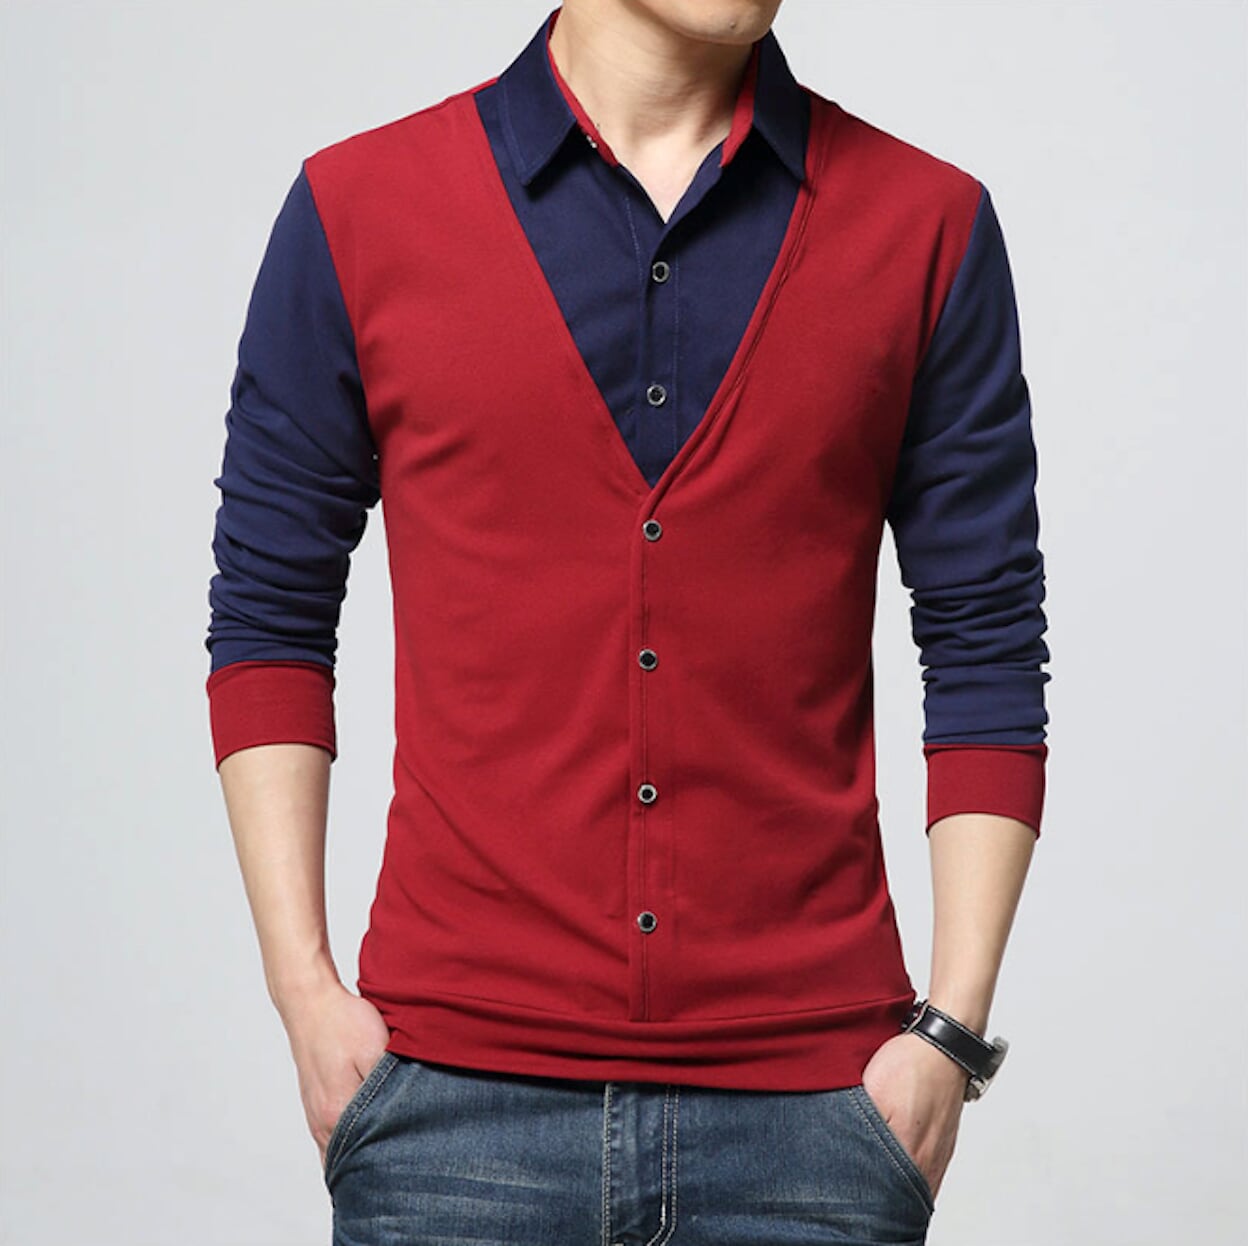 Mens Layered Look Shirt with Vest – Onetify